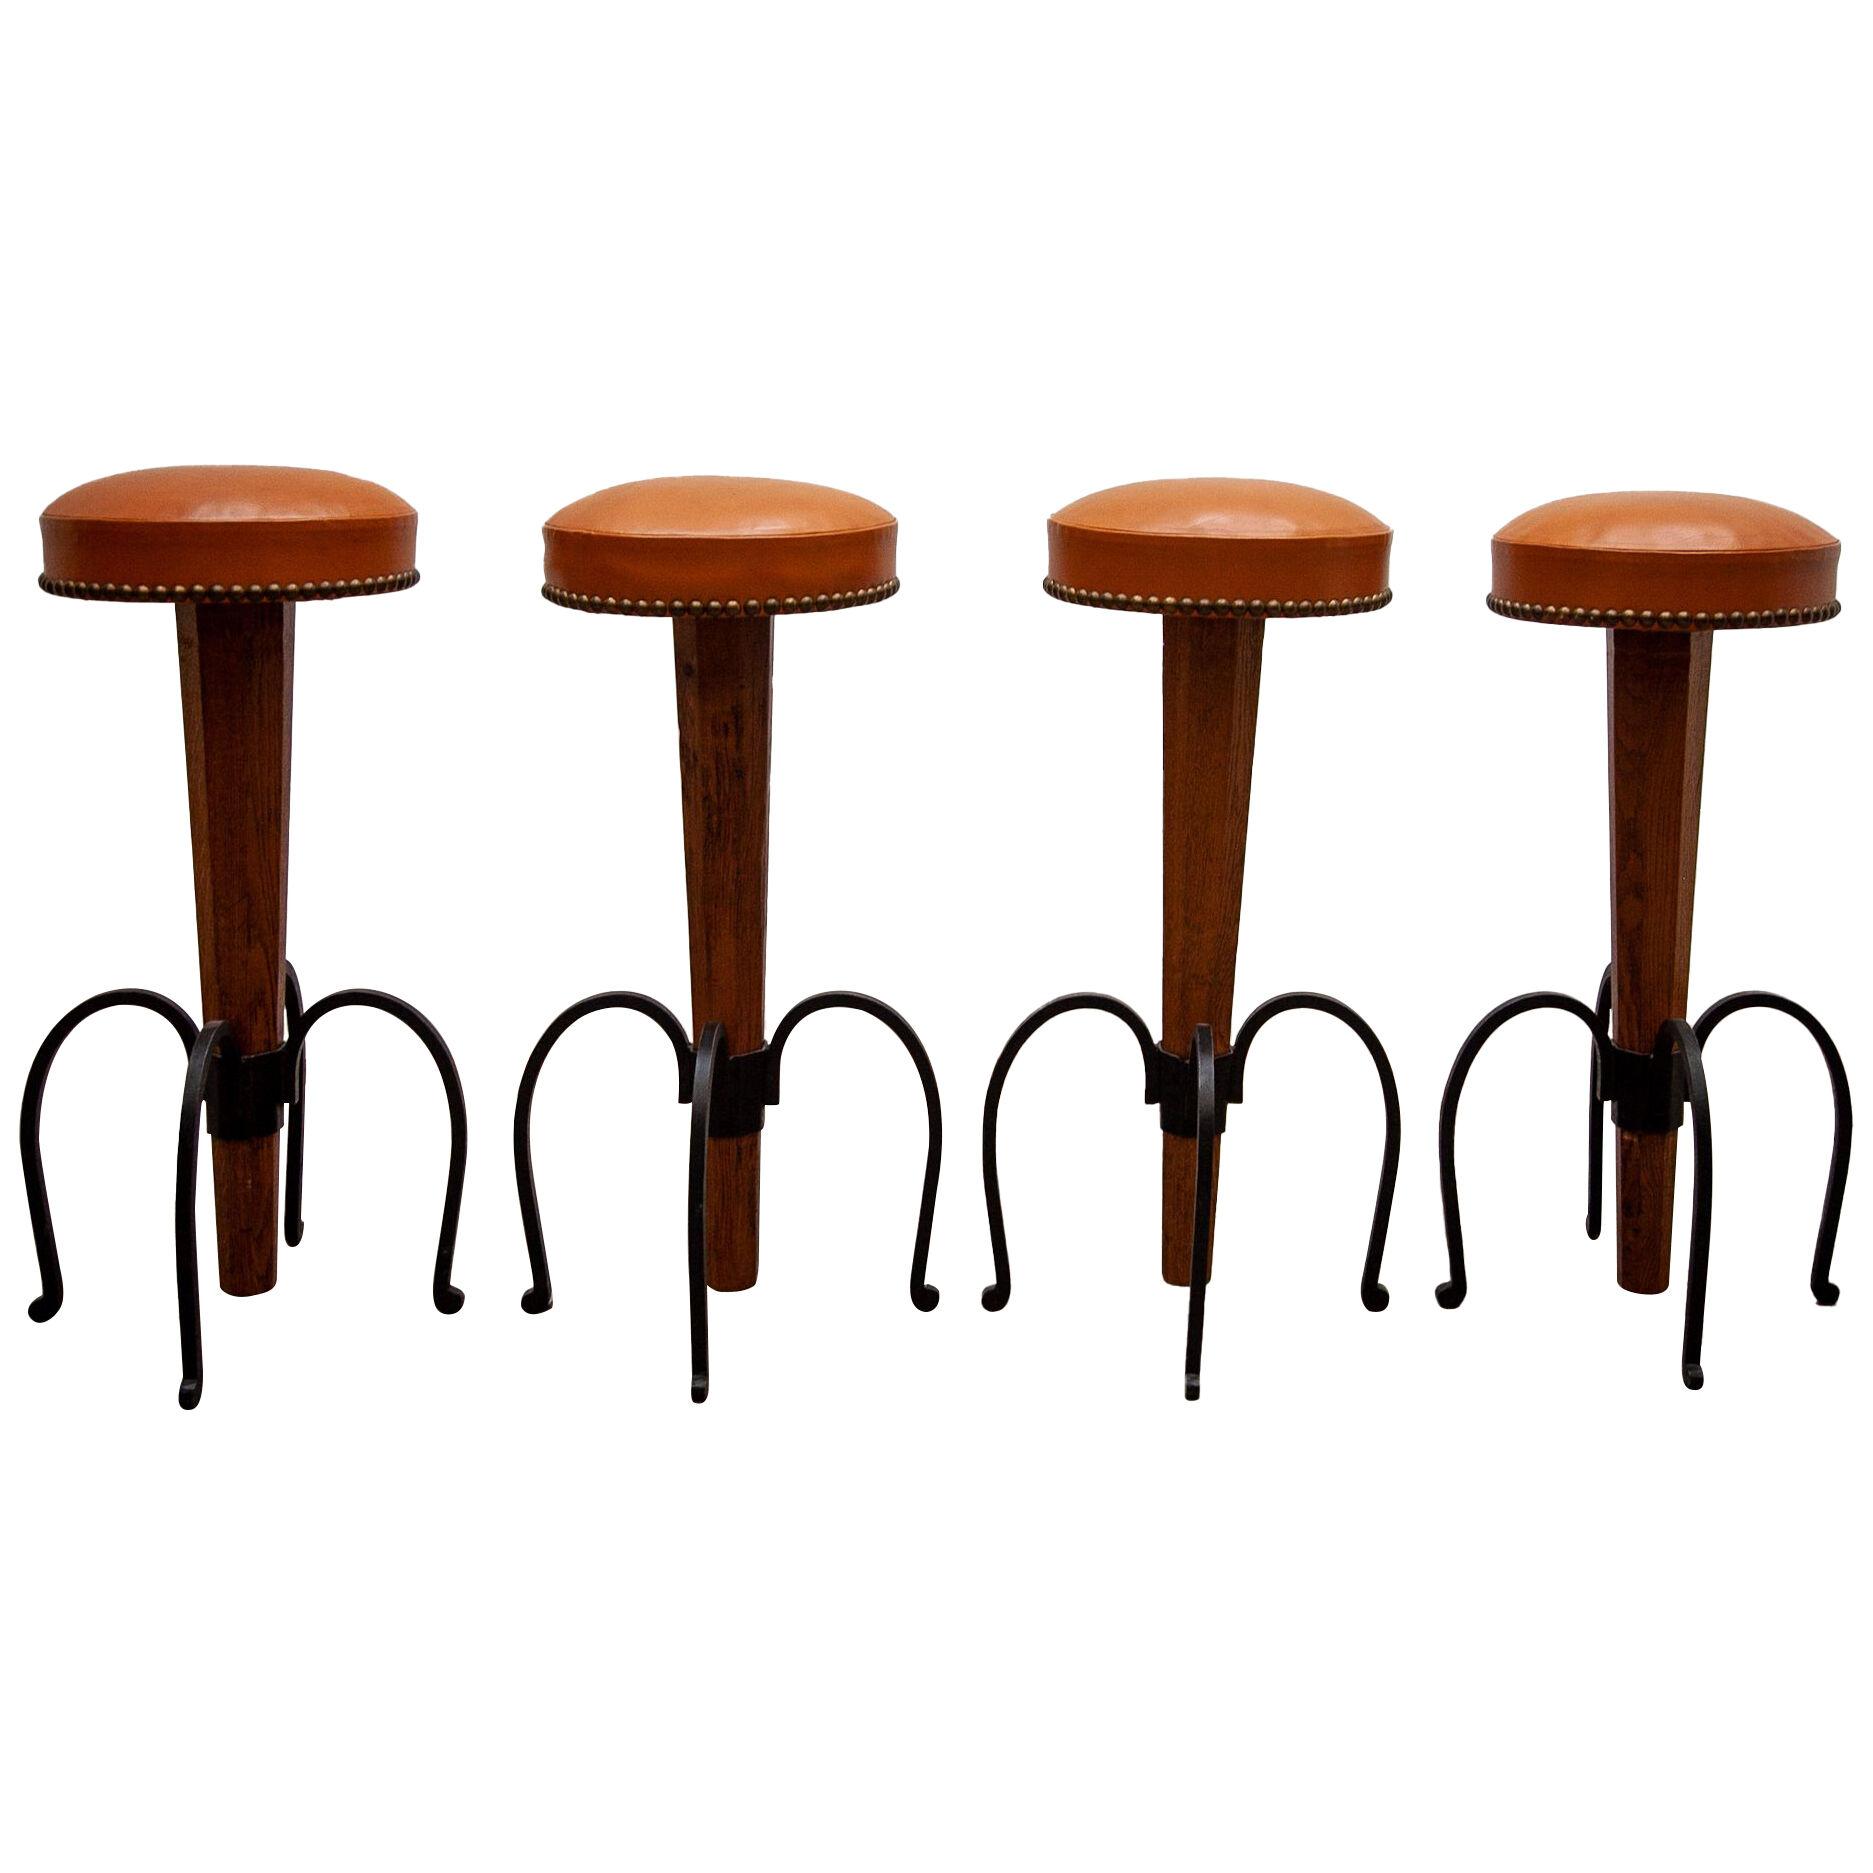 Set of four Brutalist Stools Wrought Iron, Round Camel Leather Seats